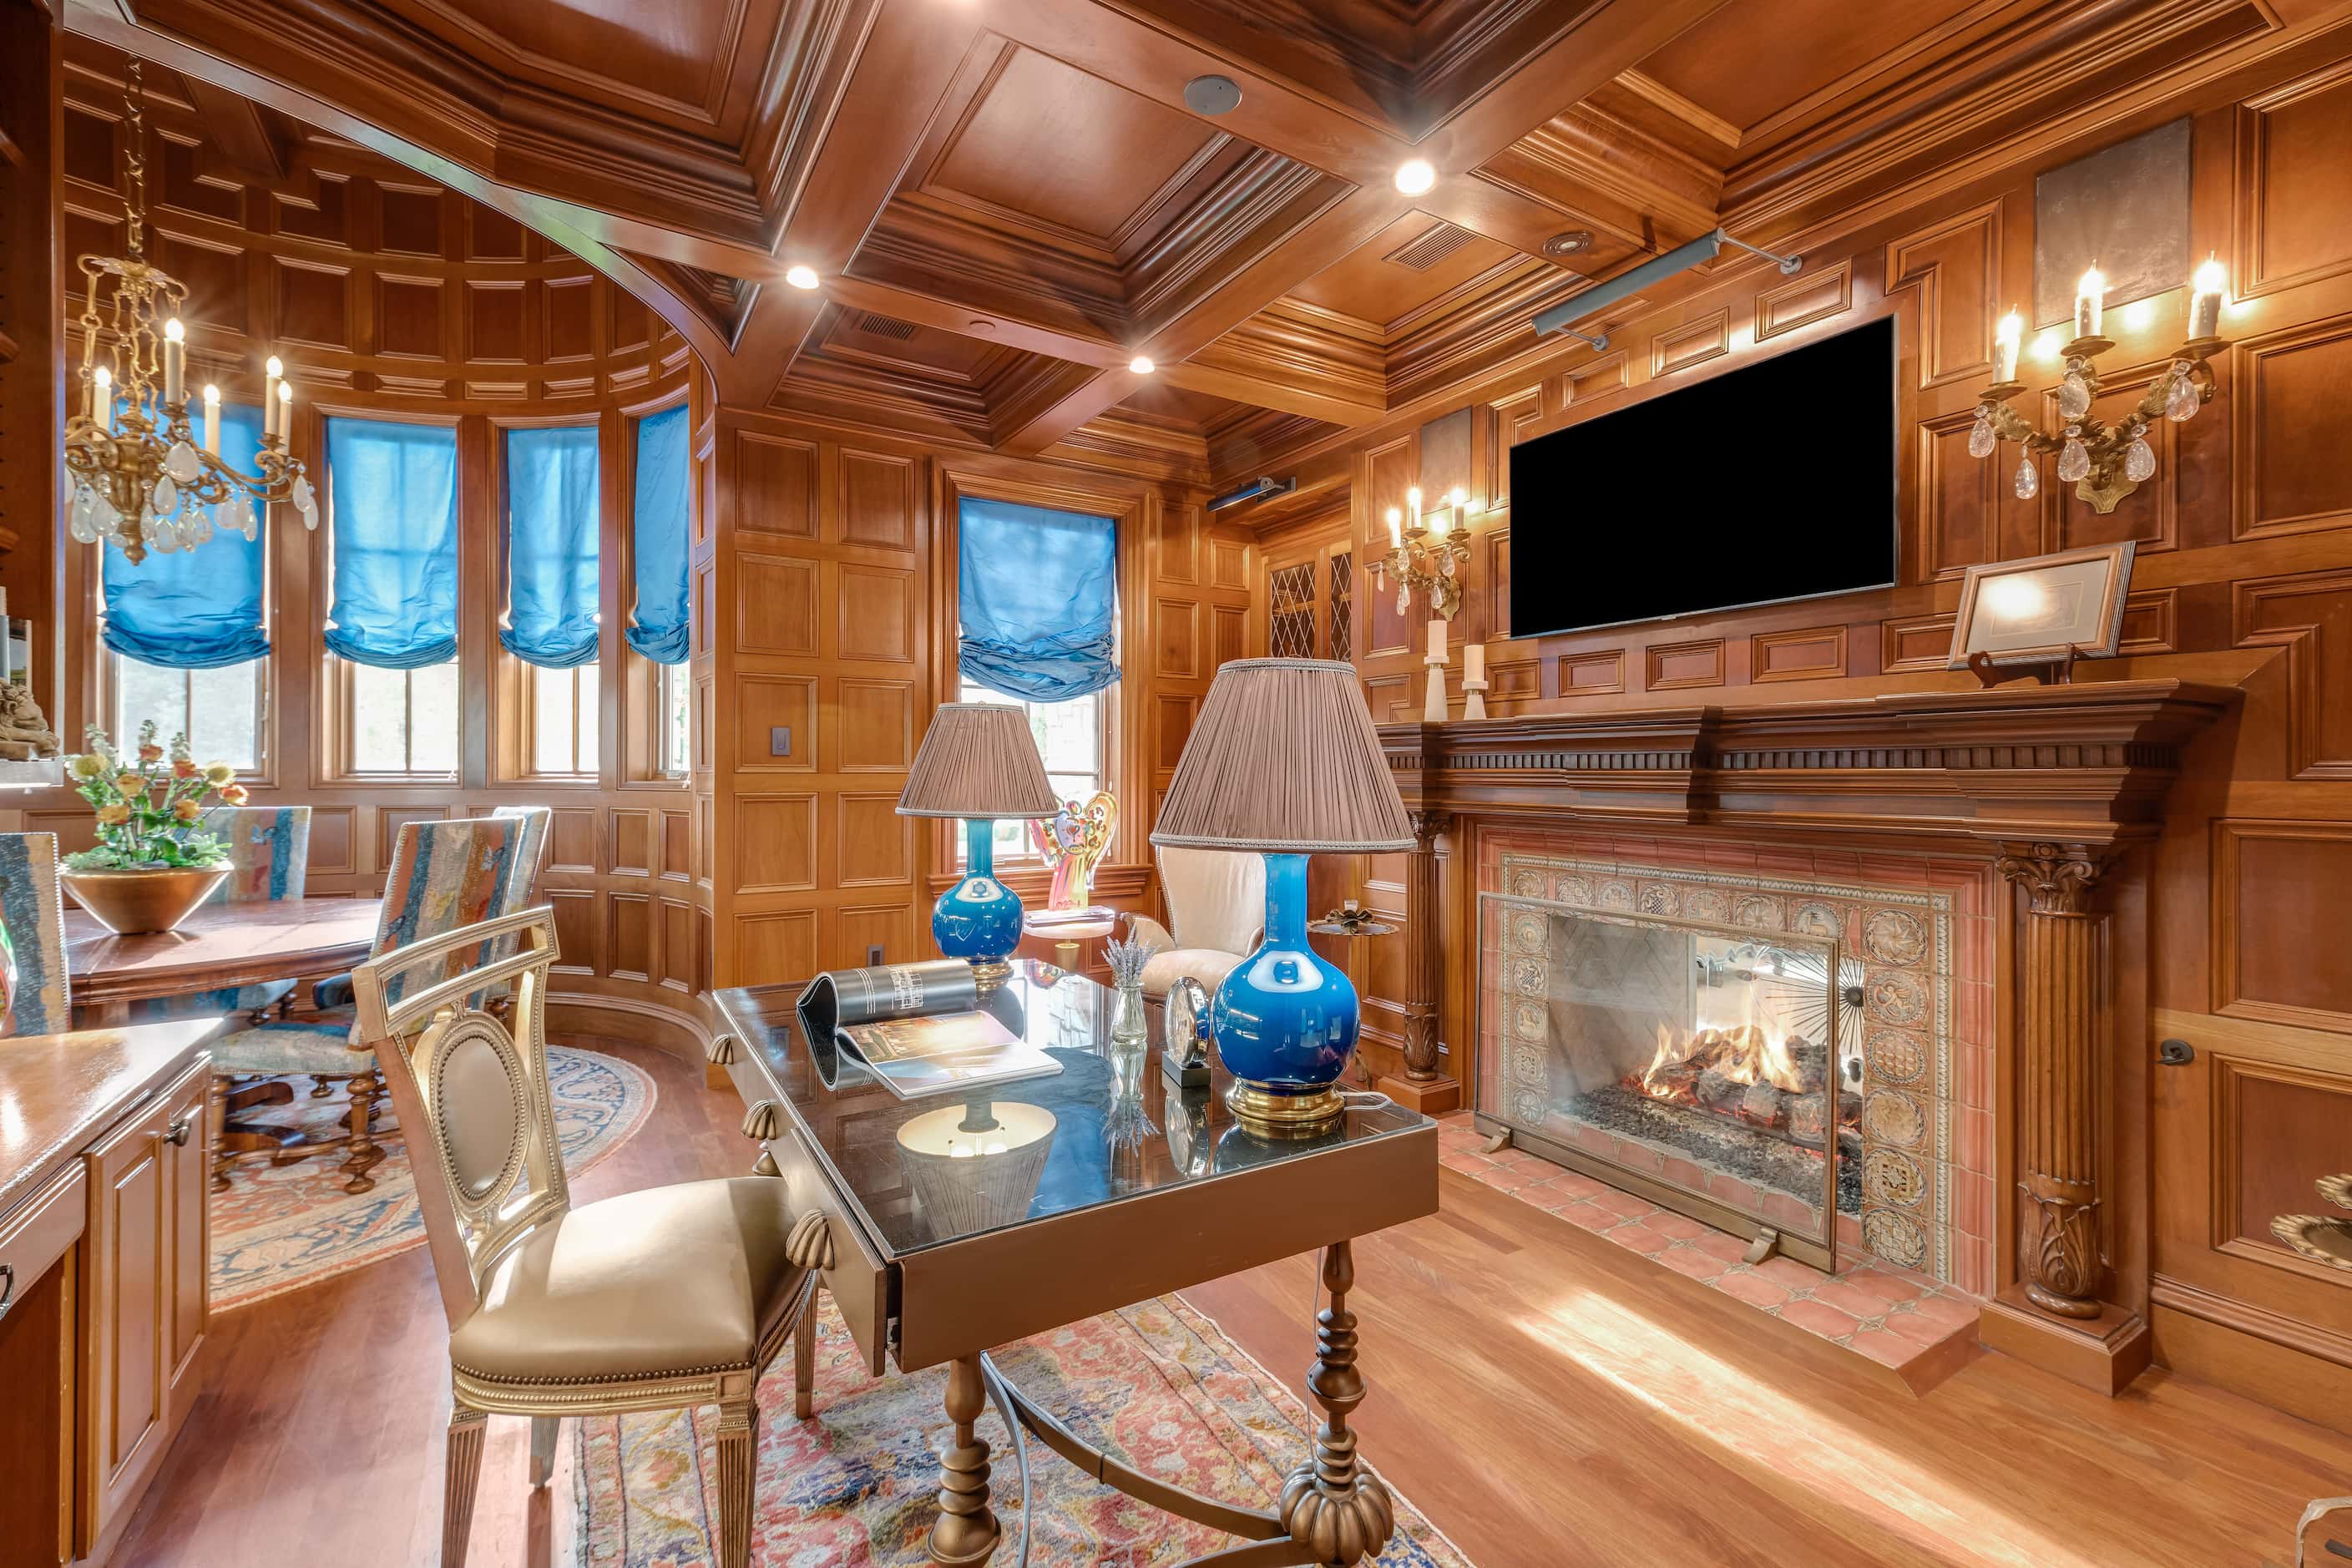 An English manor-style estate in Colleyville hit the market for $8.75 million.

The home...